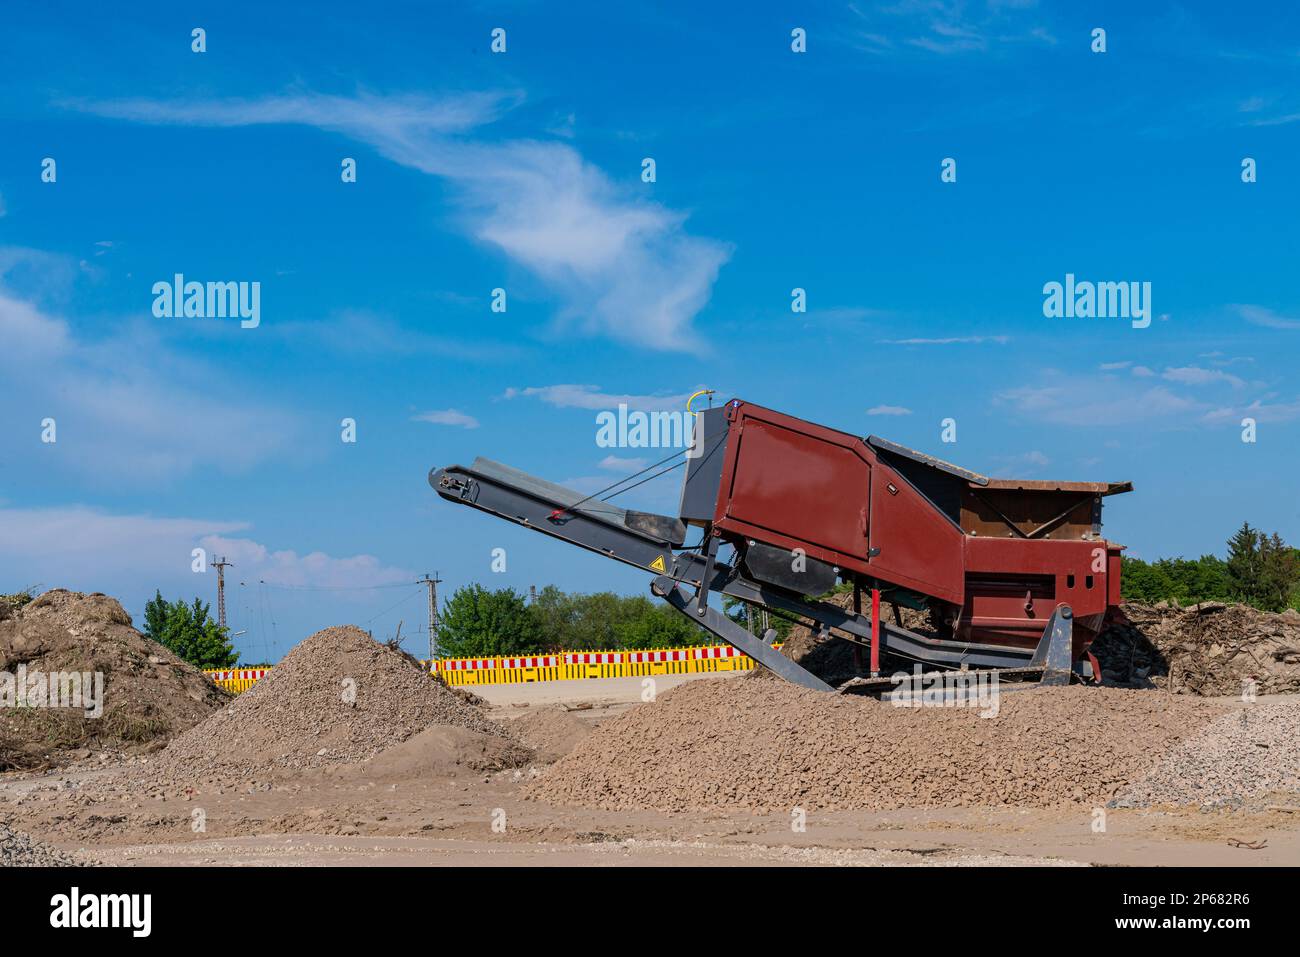 Construction machine with conveyor belt for loading bulk materials. Construction site fenced with yellow plastic barriers. Stock Photo